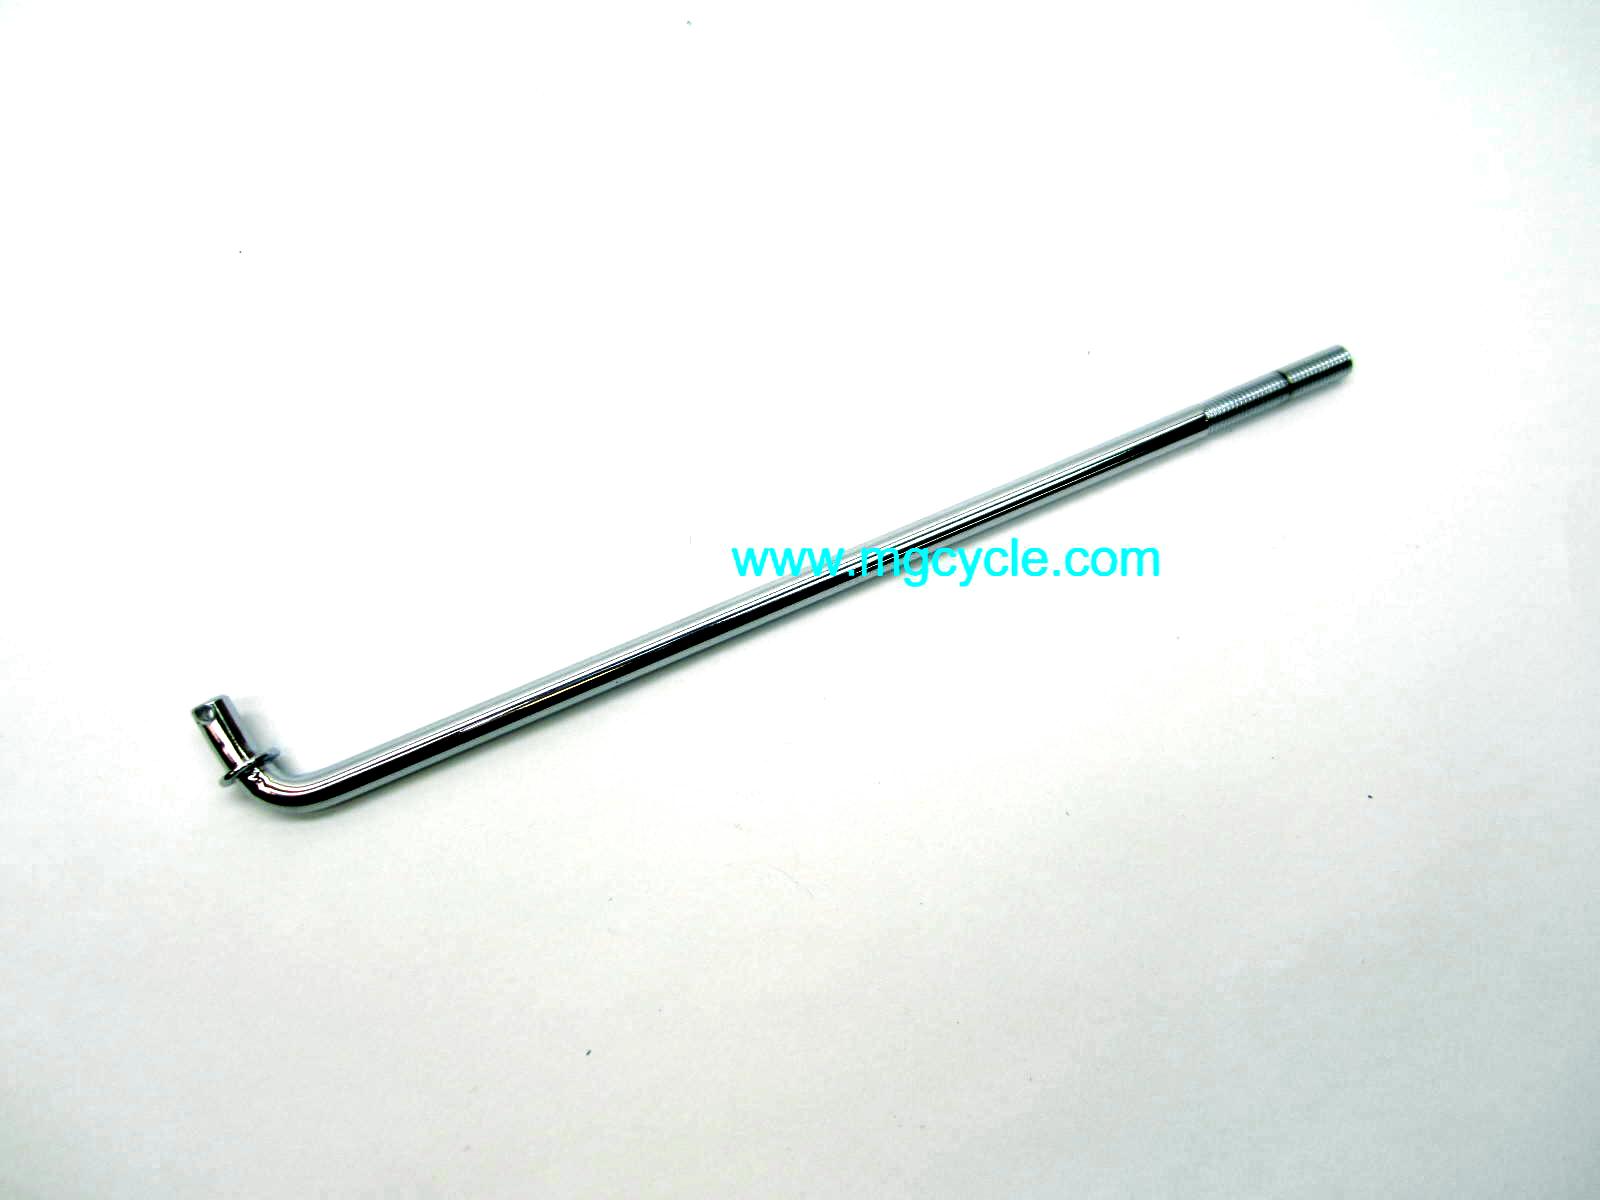 Brake rod T3 Cal and Police, Cal 2 and 3 Convert G5 Cal 1100